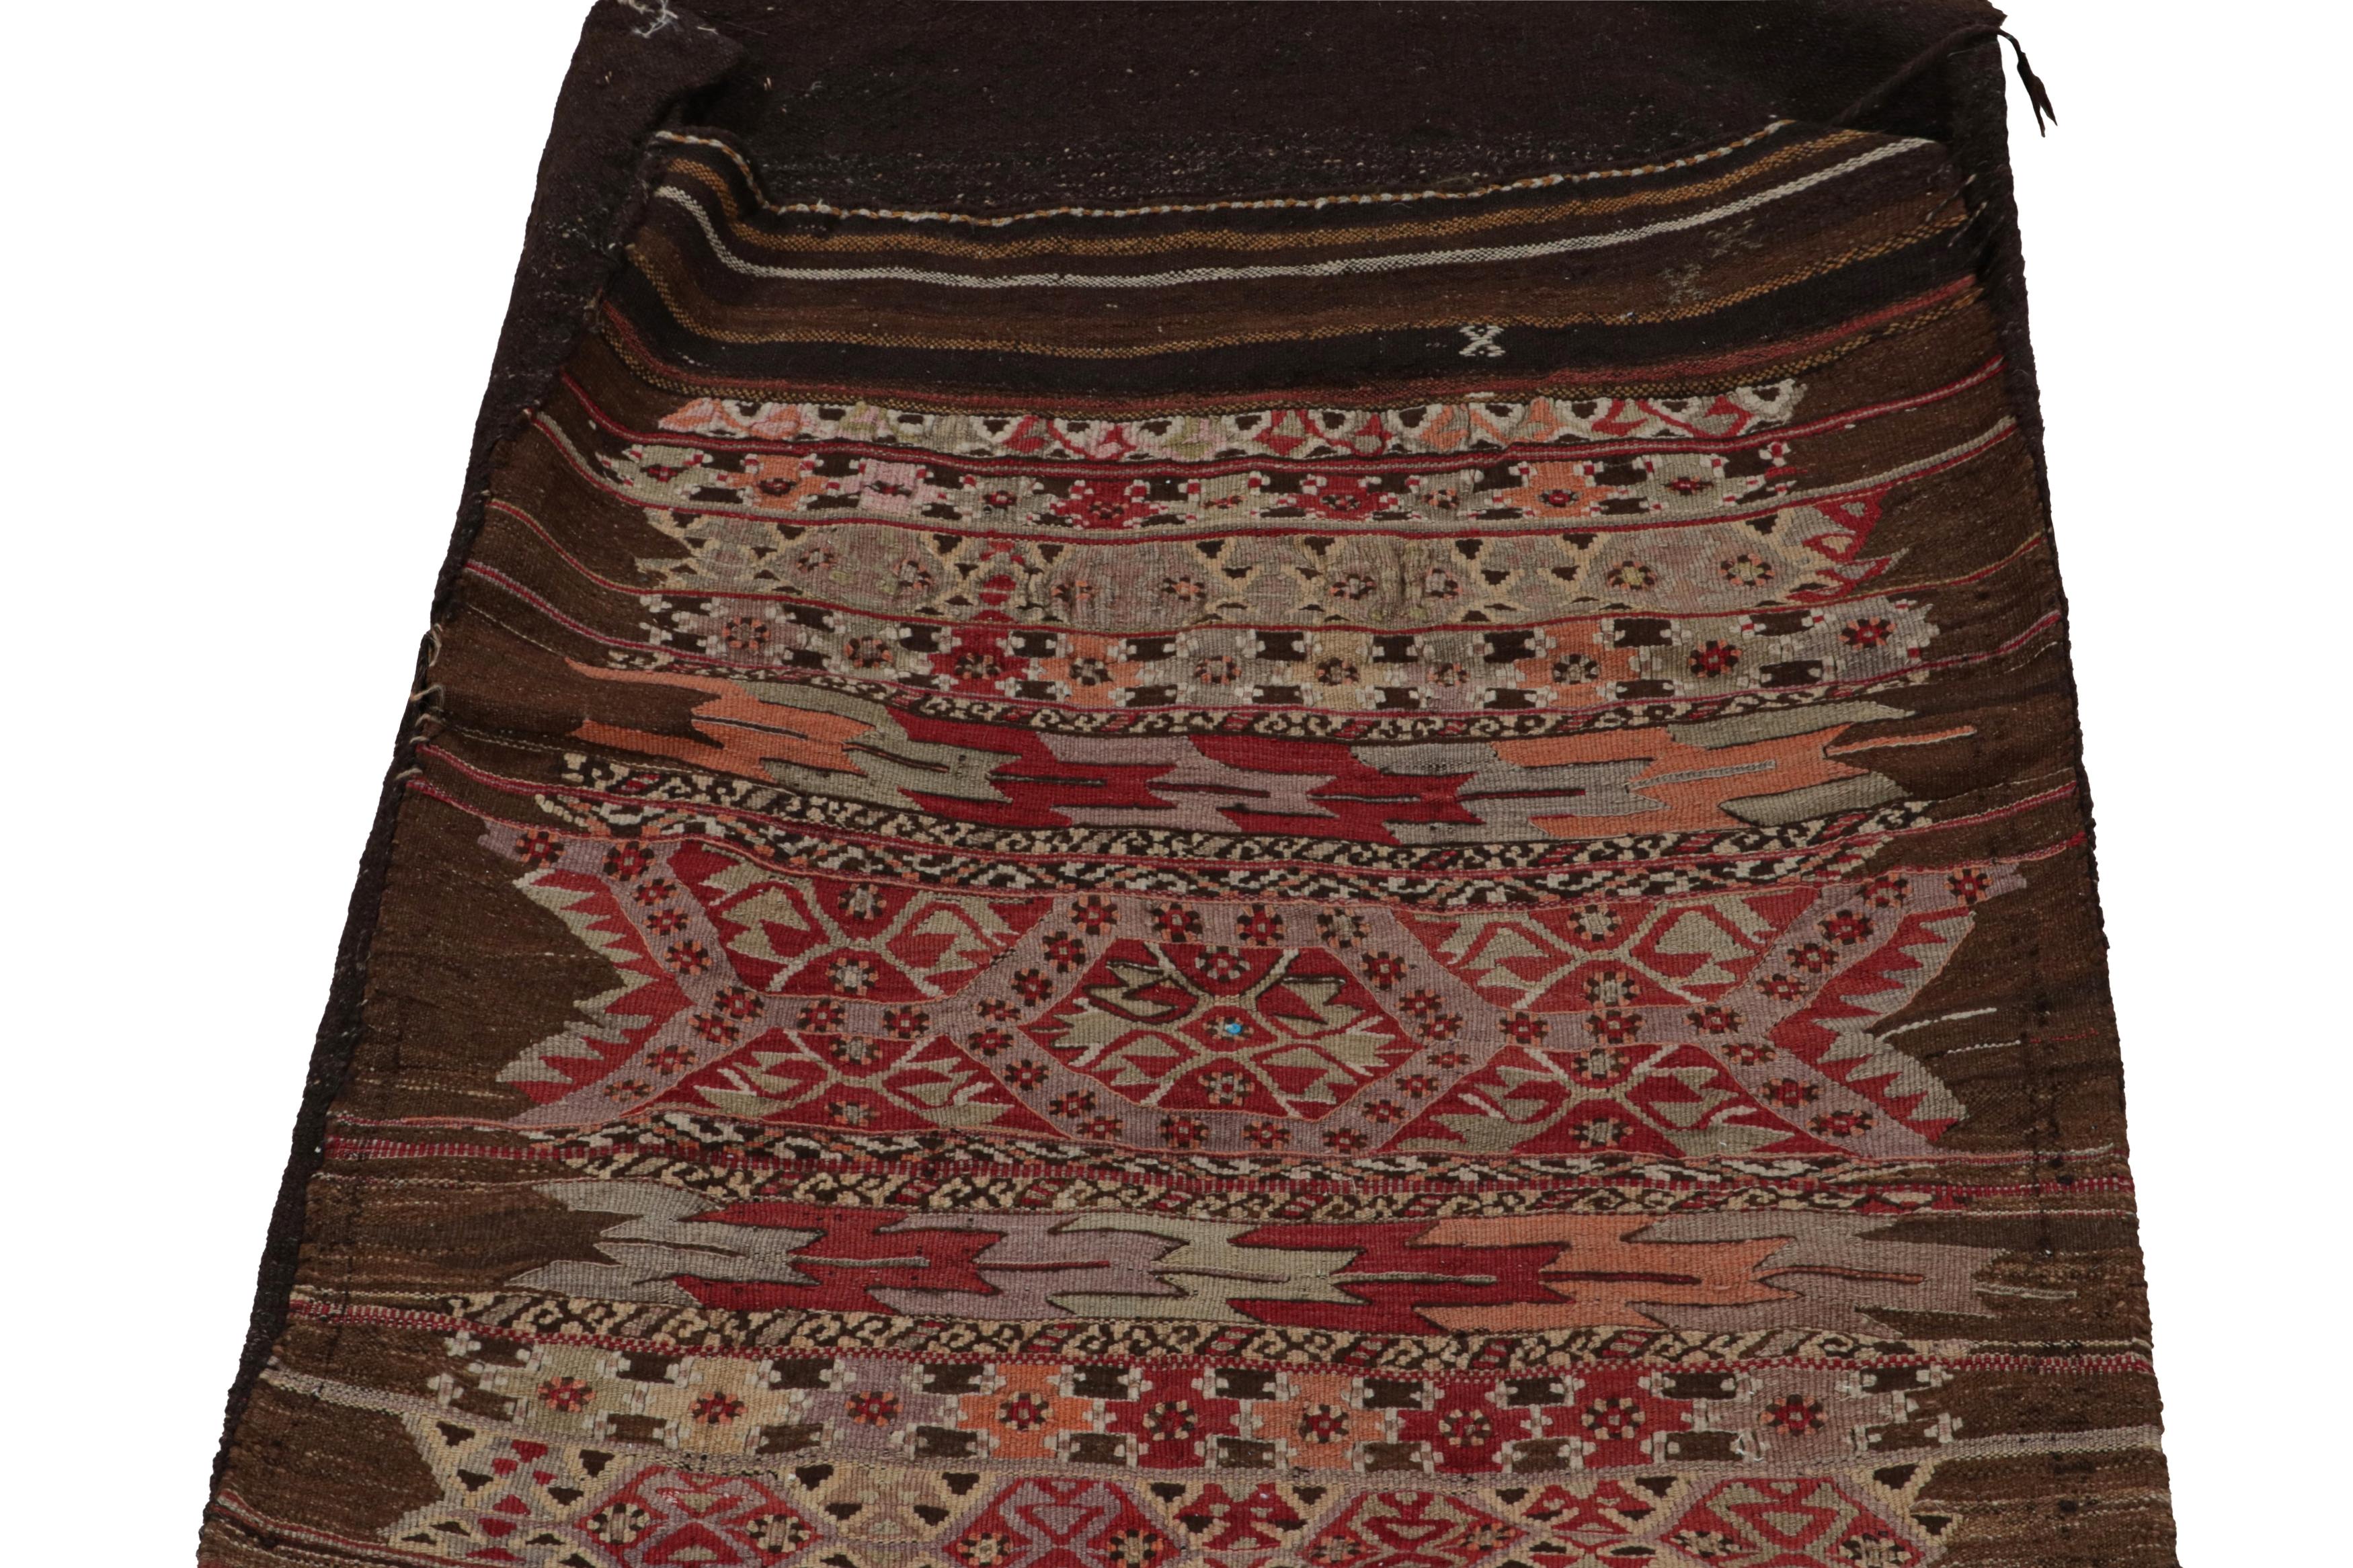 Tribal Antique Persian Bag Kilim in Brown with Geometric Patterns, from Rug & Kilim For Sale